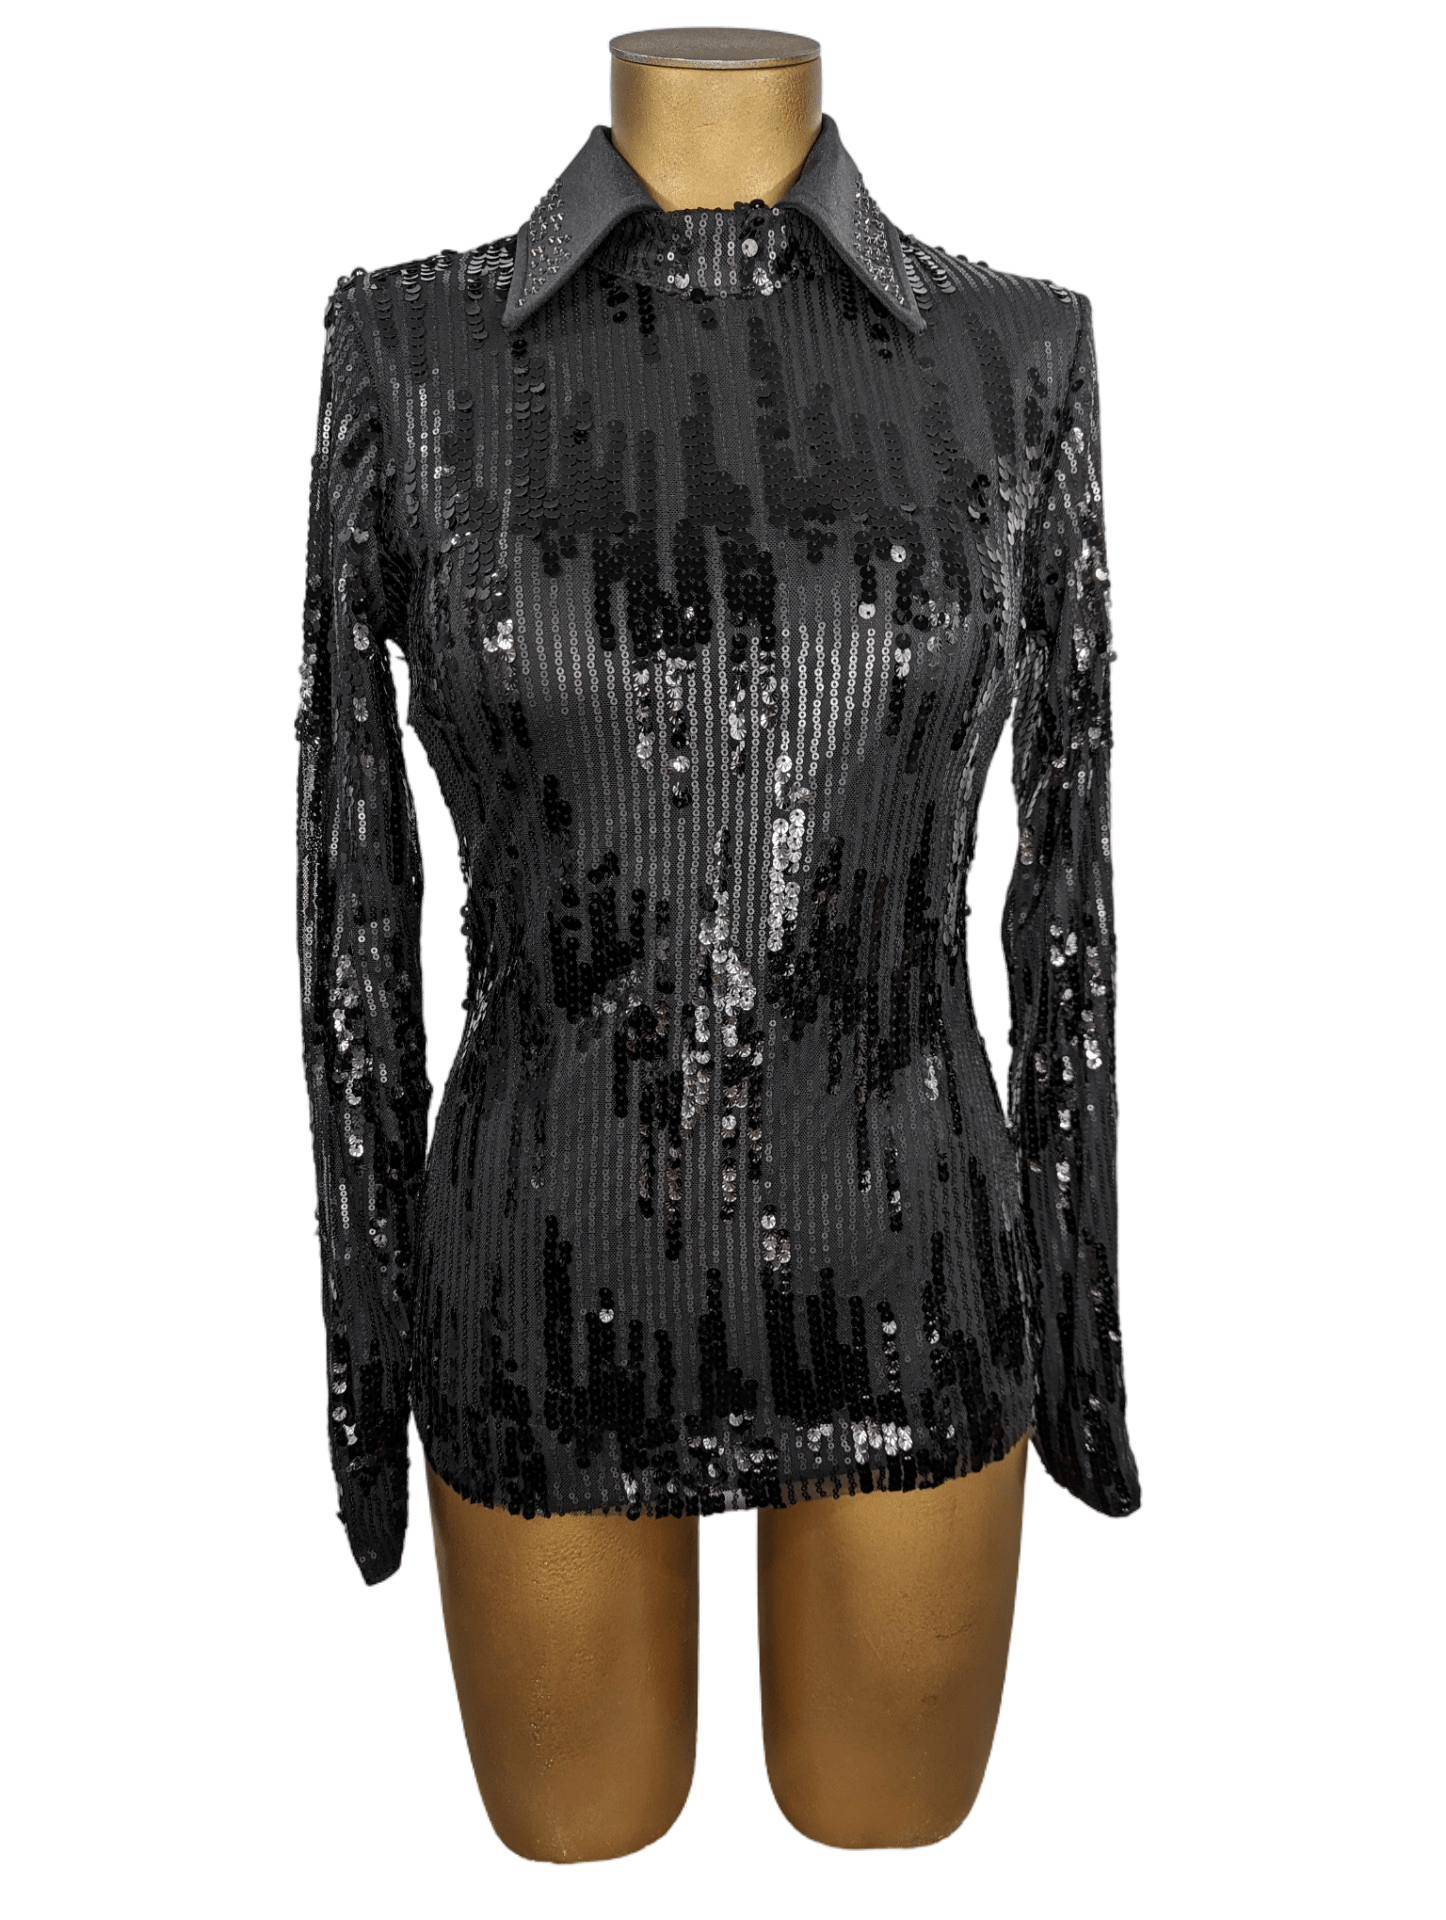 sparkle-ridge-womens-western-wear-affordable-show-clothes-horse-shirts-with-bling-rodeo-bodysuit-jet-black-sequin-heiress-front.png